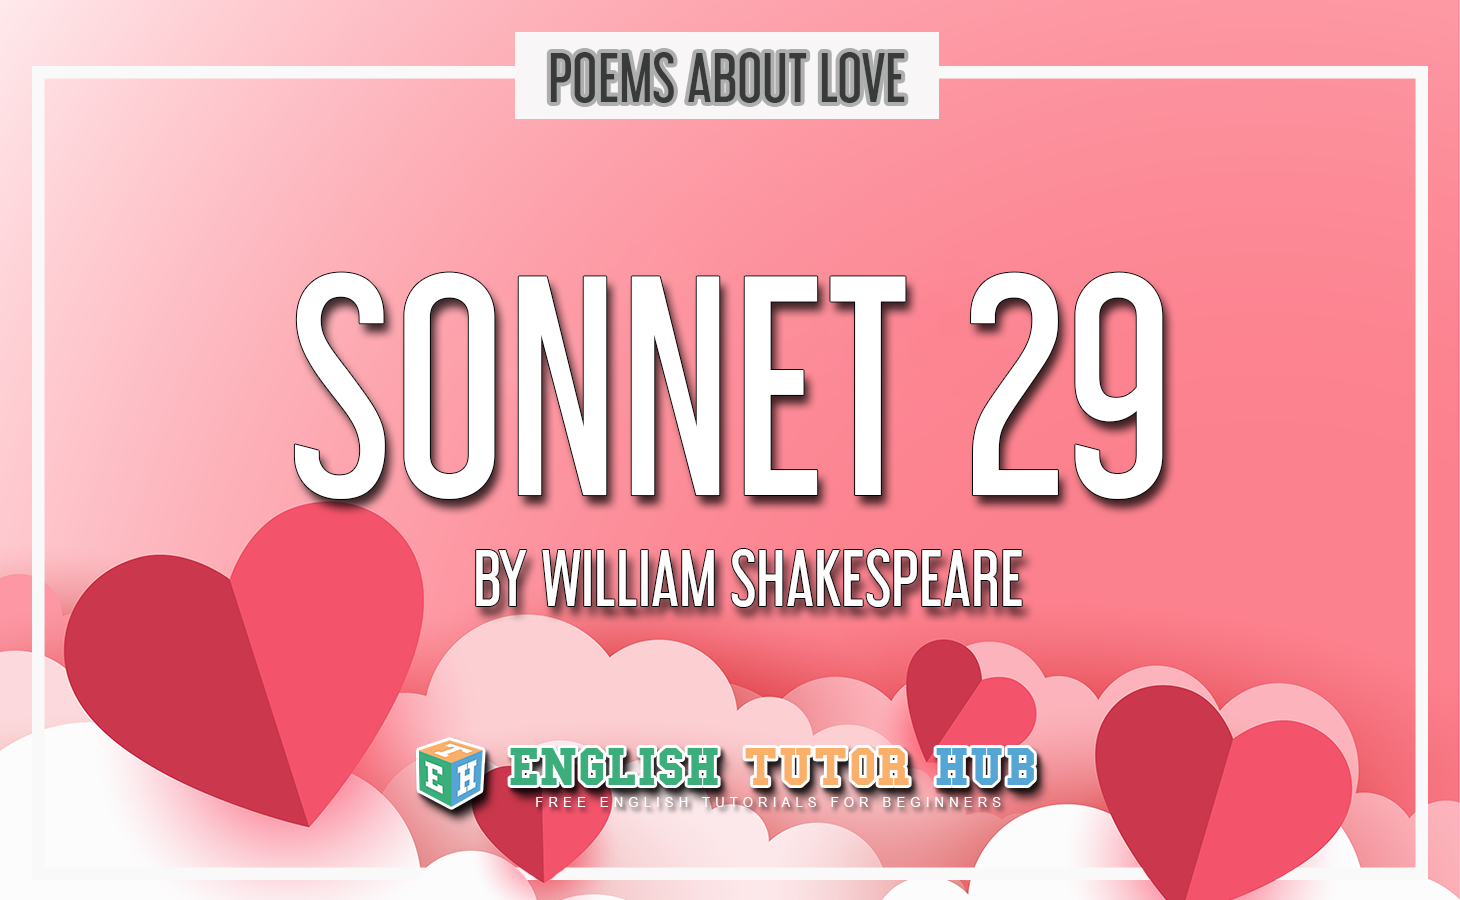 Sonnet 29 by William Shakespeare - Summary and Meaning [2022]